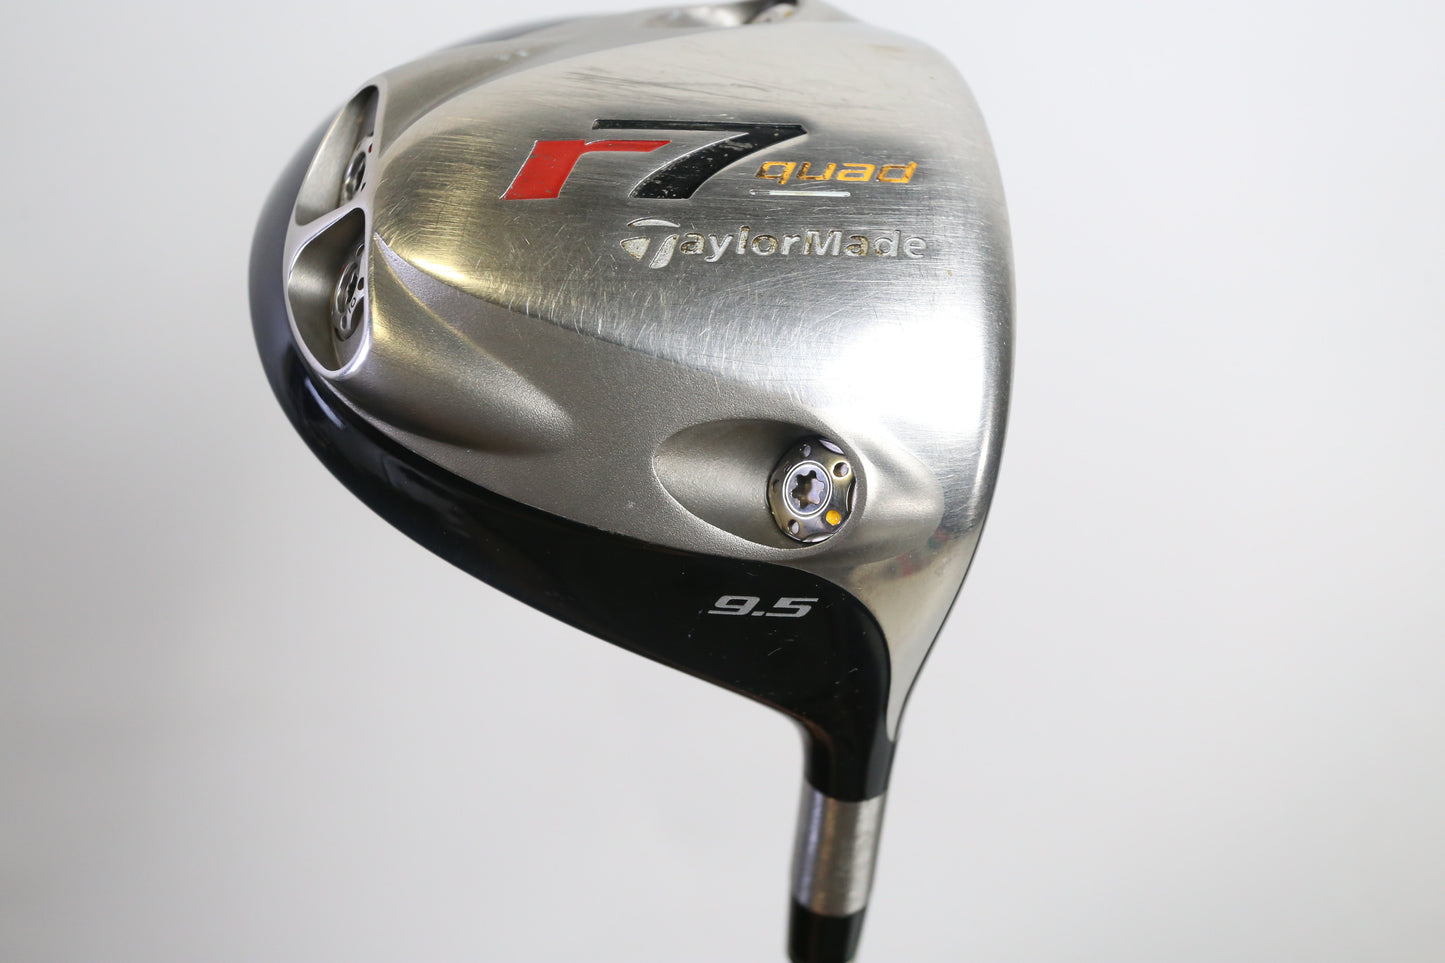 Used TaylorMade r7 quad Driver - Right-Handed - 9.5 Degrees - Stiff Flex